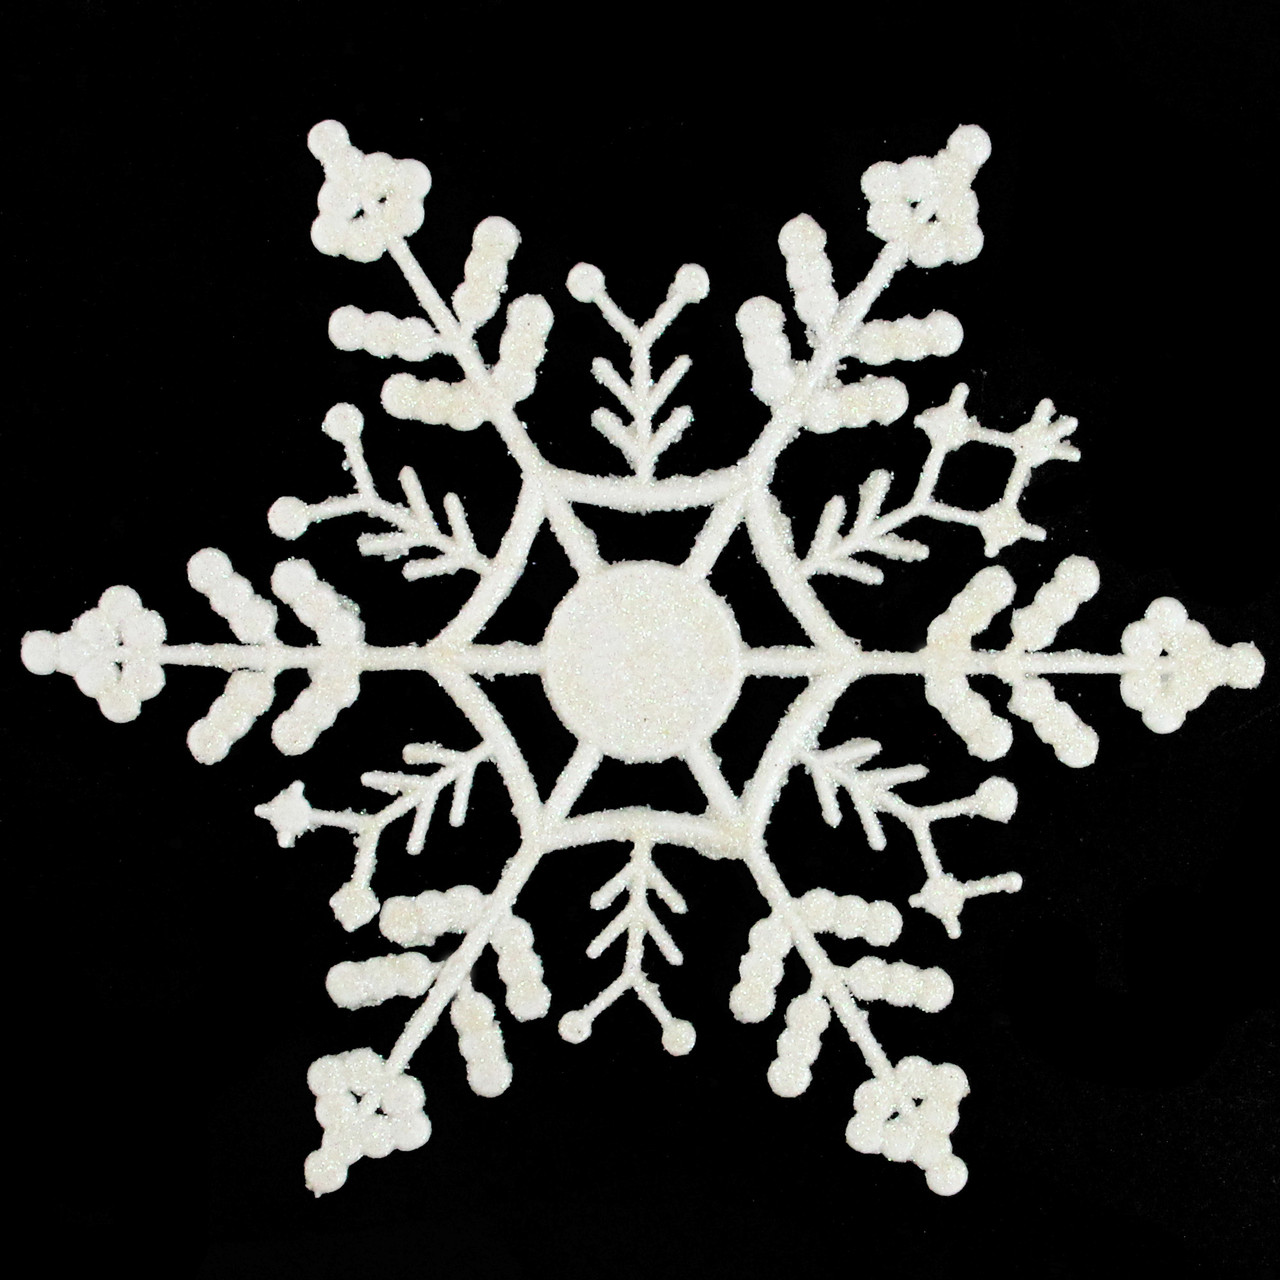  12 Inch Christmas Snowflakes Large Christmas Snowflake Ornaments  Glitter Christmas Hanging Ornaments Big Christmas Snowflake Decorations for  Window Decor Winter Decorations (White,24 Pcs) : Home & Kitchen